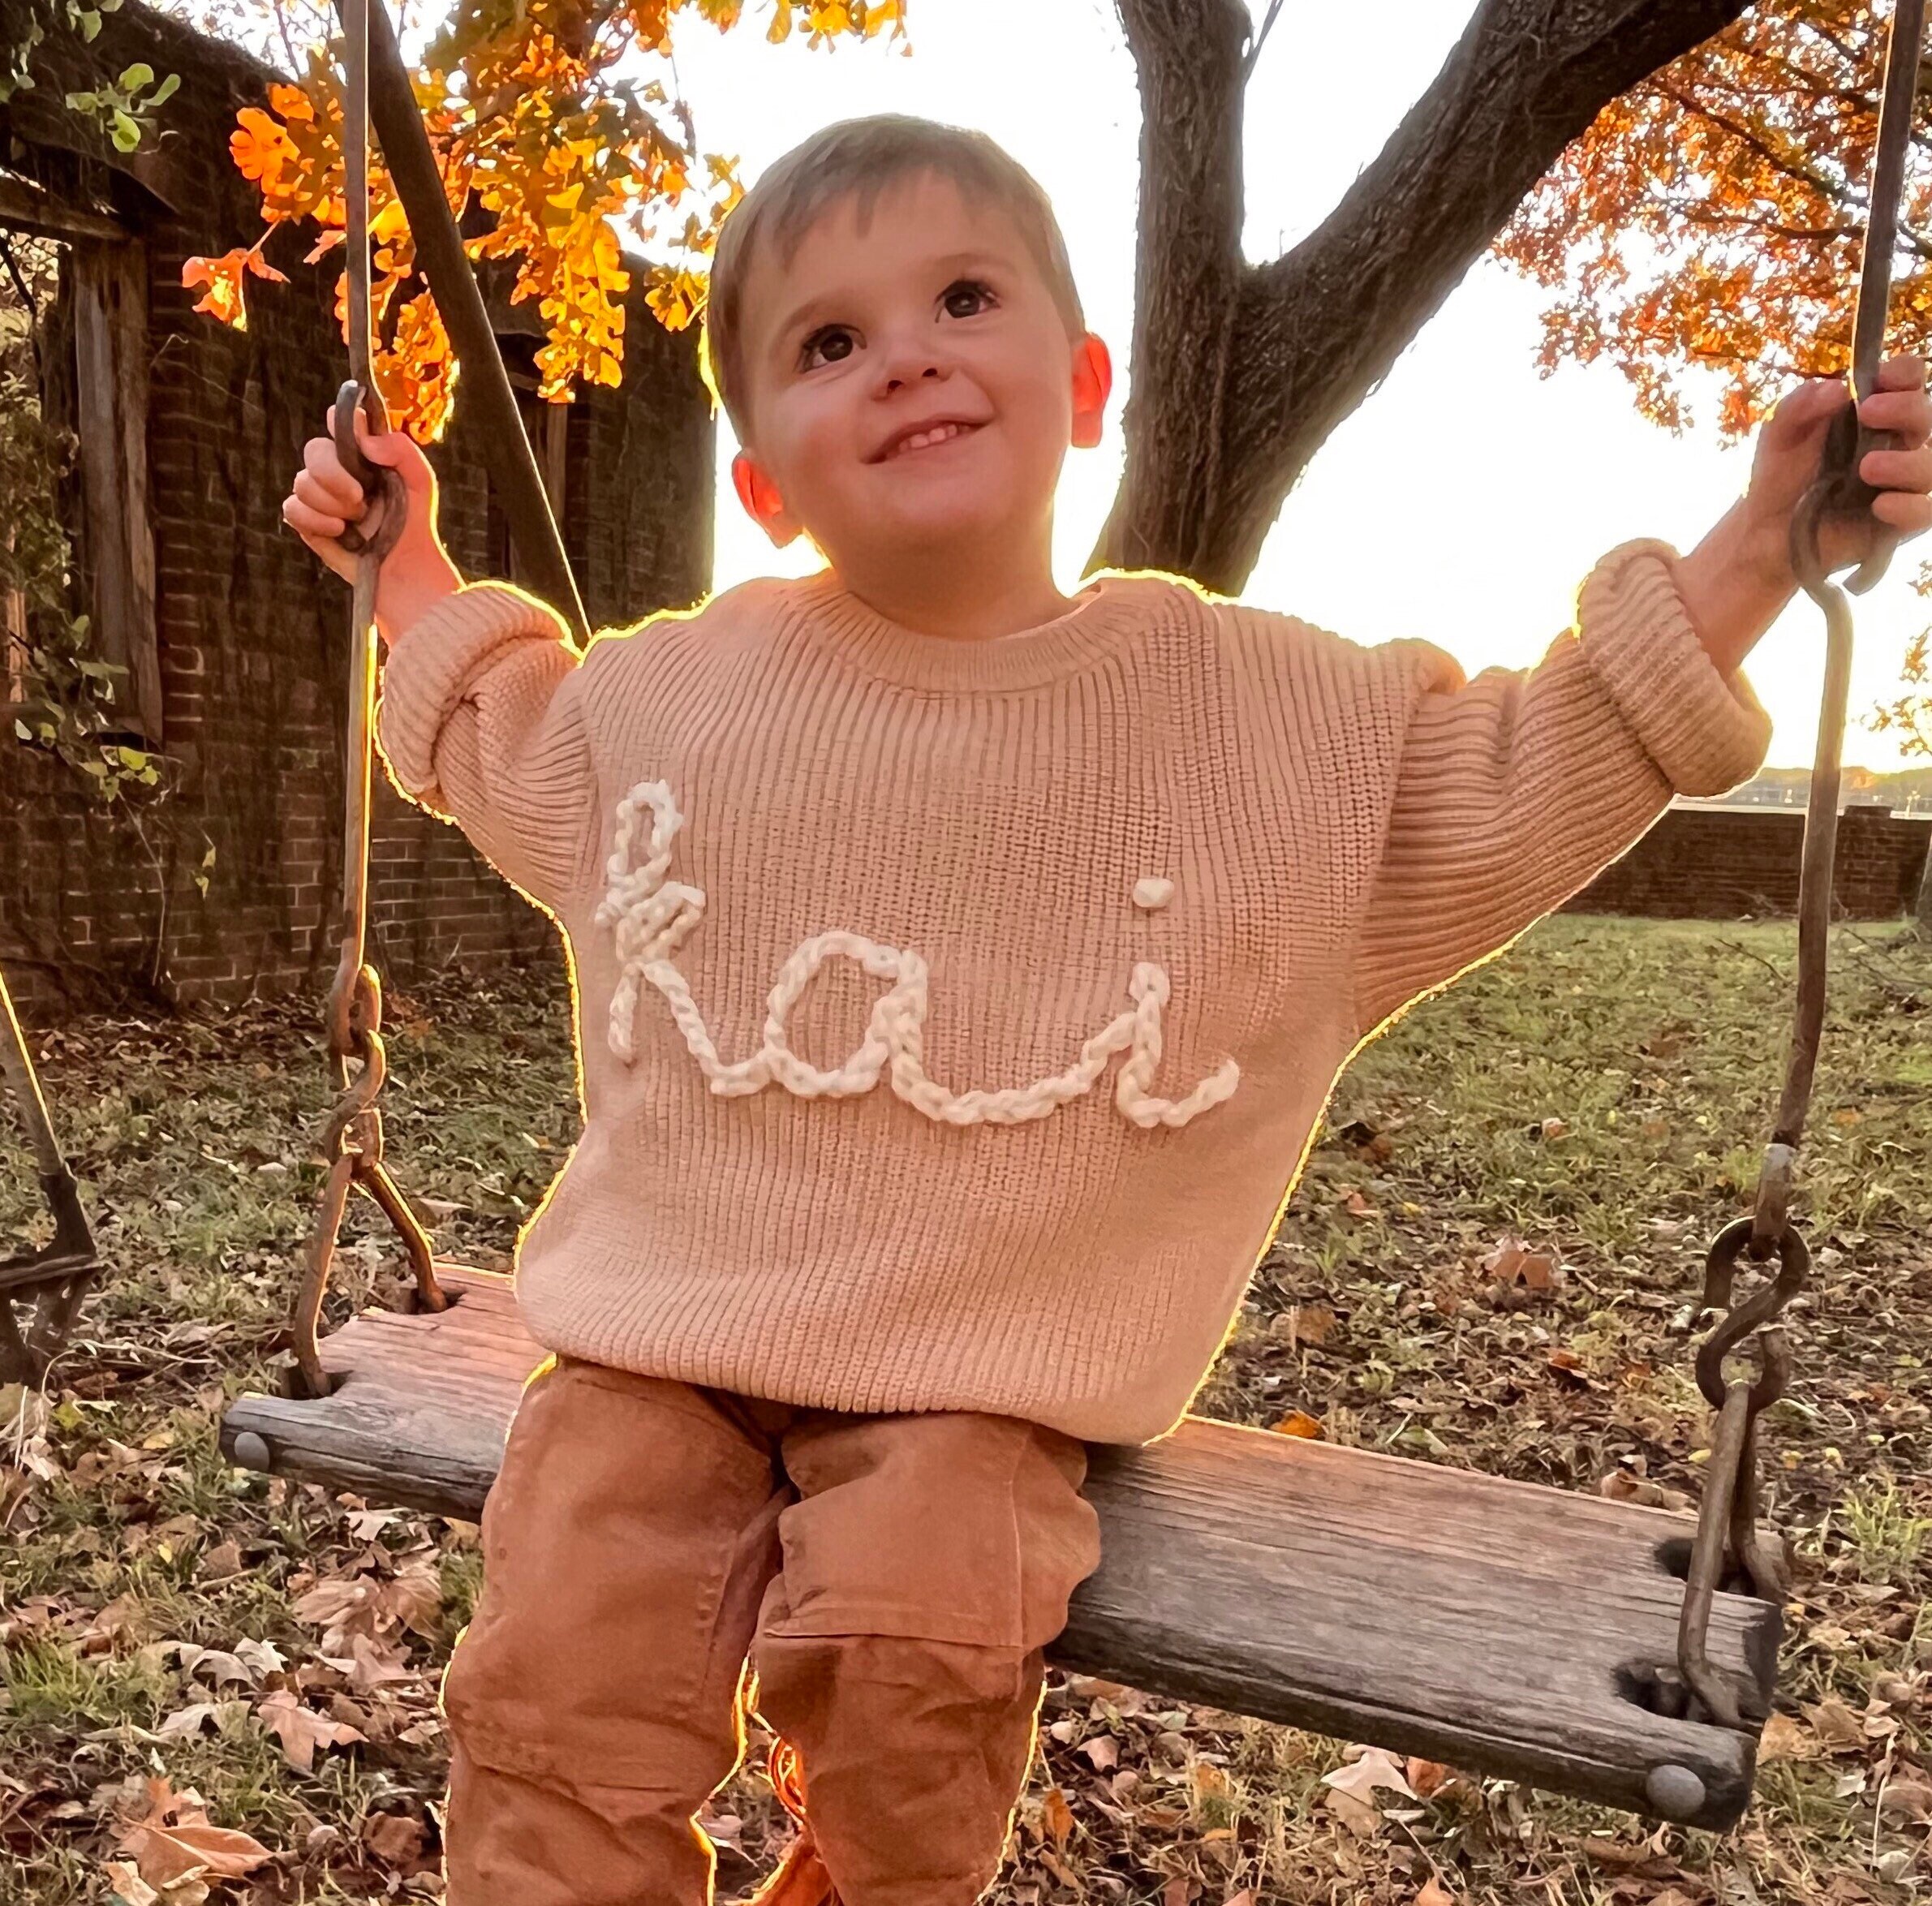 chain stitch font custom baby name sweater red green white or brown Kleding Unisex kinderkleding Unisex babykleding Sweaters Personalized baby Toddler Embroidered name sweater baby toddler gift 